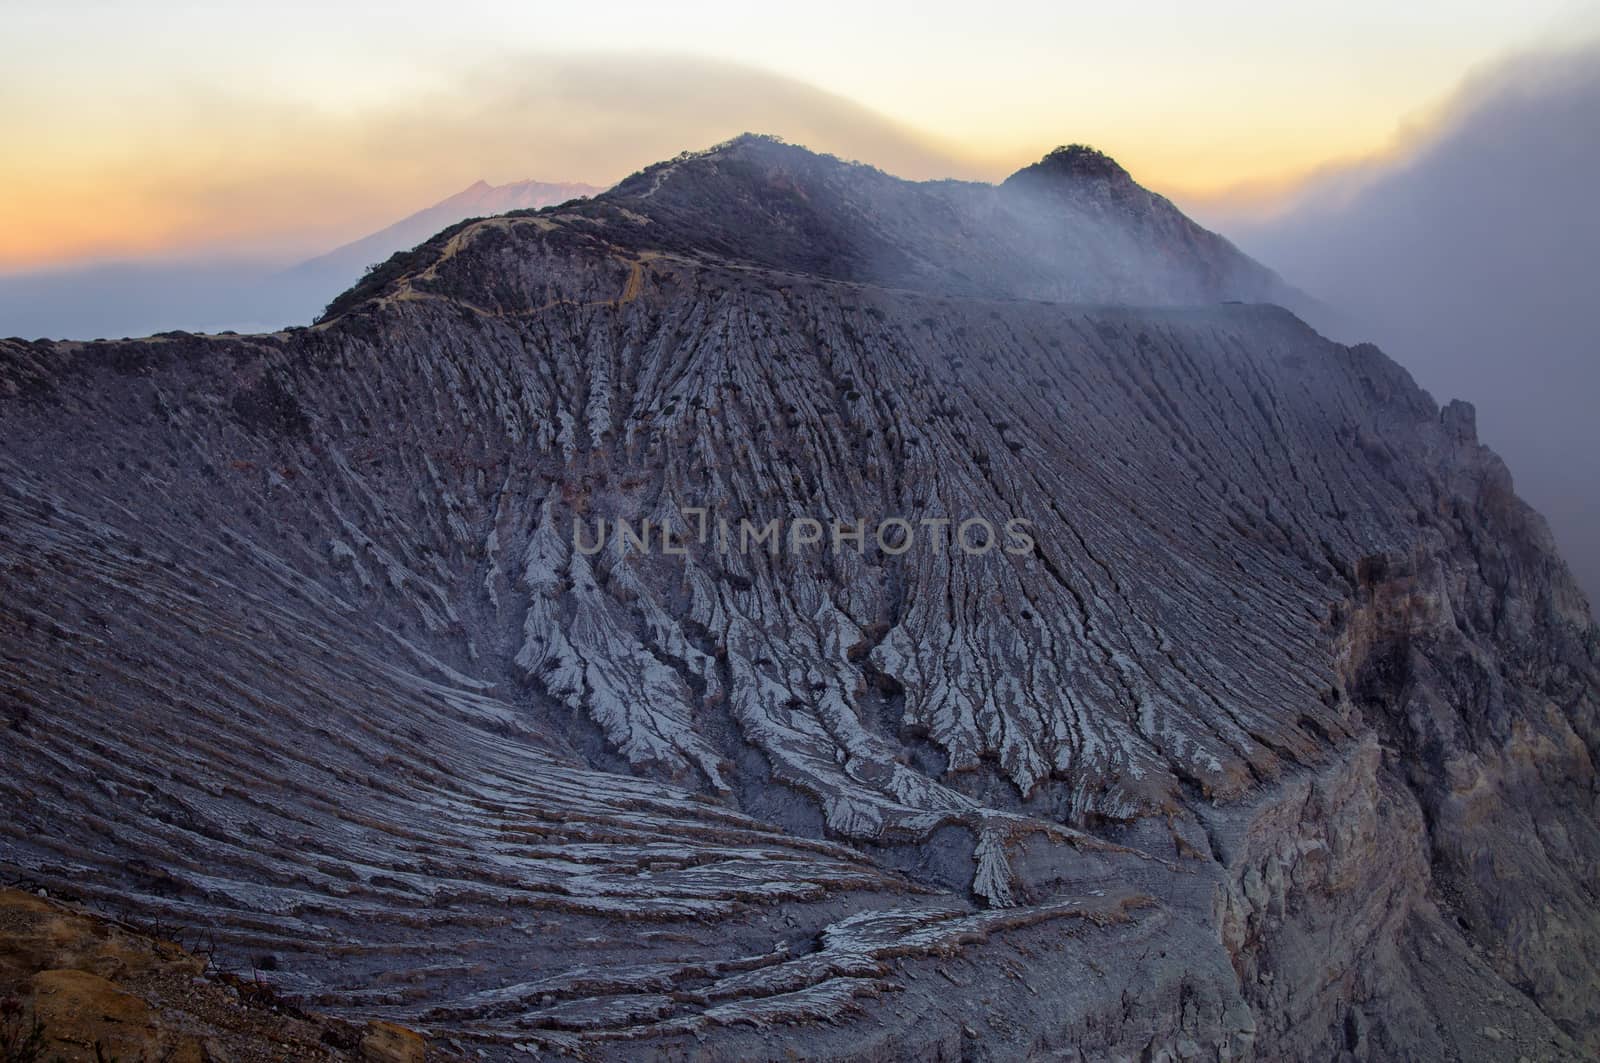 Ijen volcano in East Java in Indonesia. It's famous for sulfur mining and acid lake.